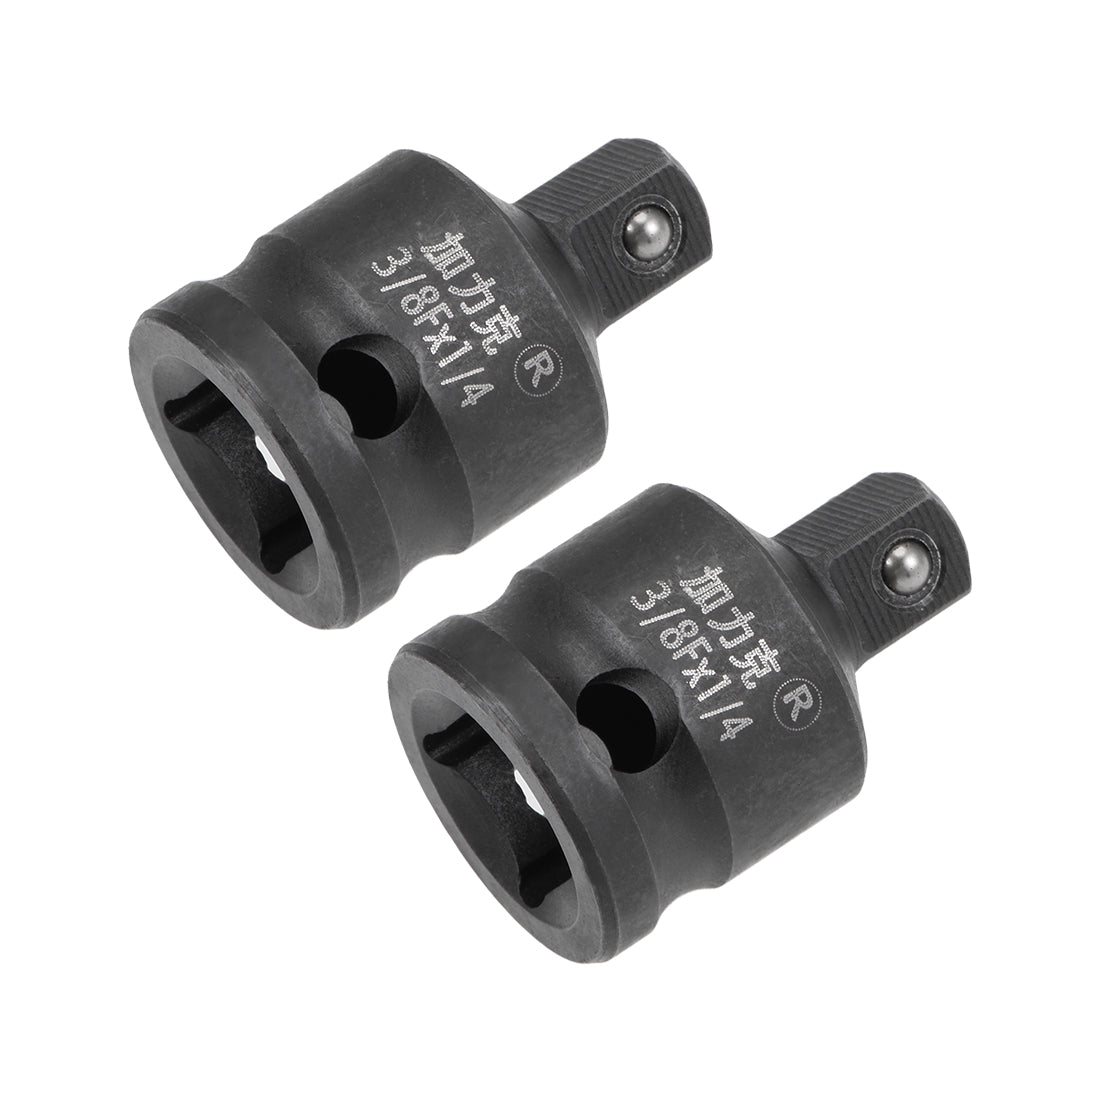 uxcell Uxcell 2 Pcs 3/8 Inch Drive (F) x 1/4 Inch (M) Impact Socket Reducer for Ratchet Wrenches, Female to Male, Cr-Mo